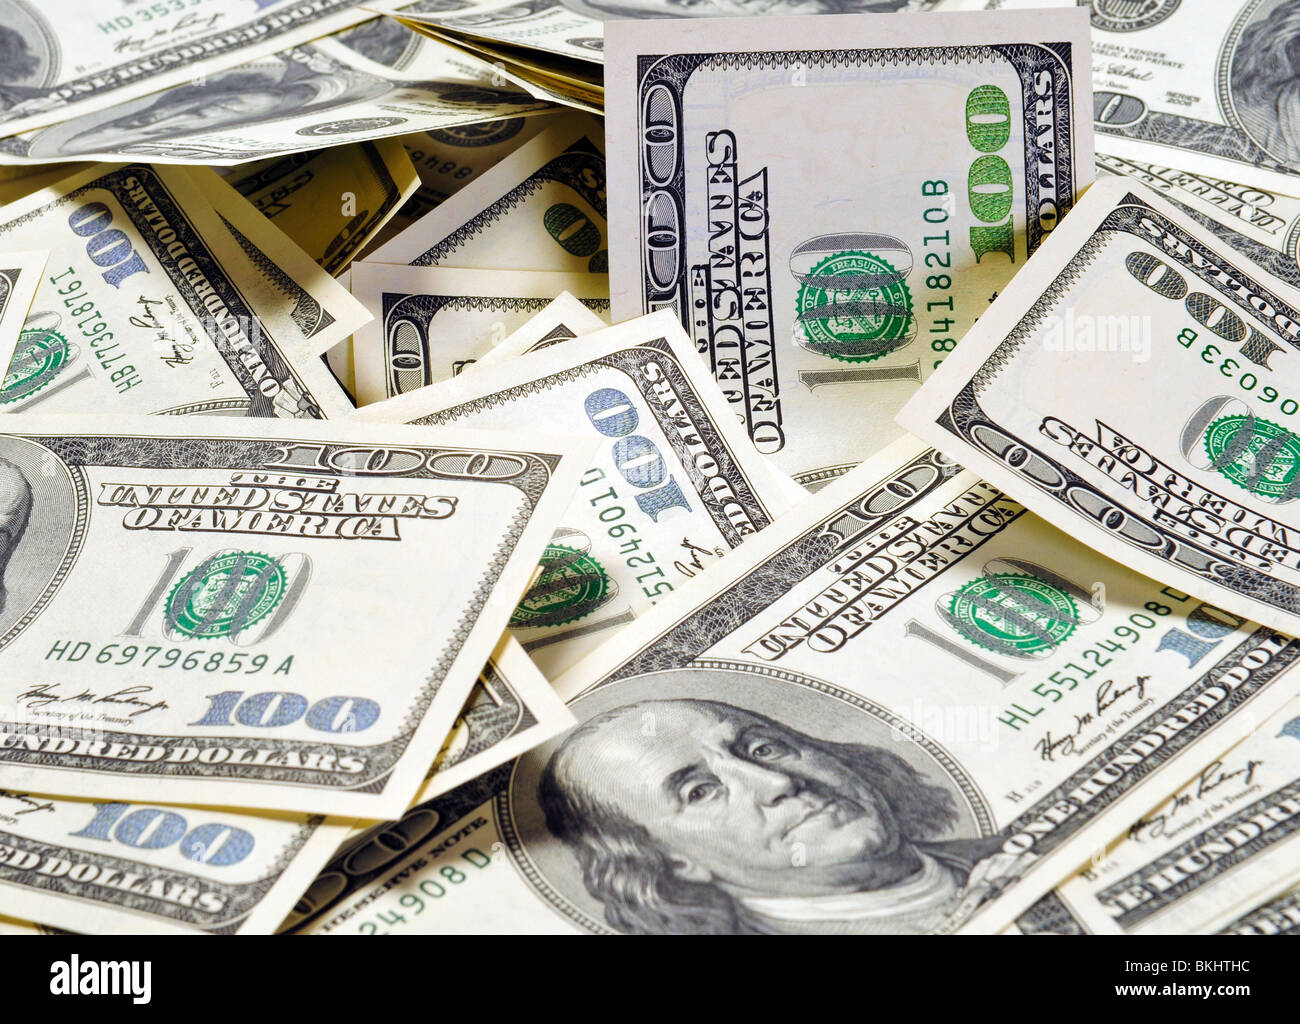 US dollars, abstract business background Stock Photo